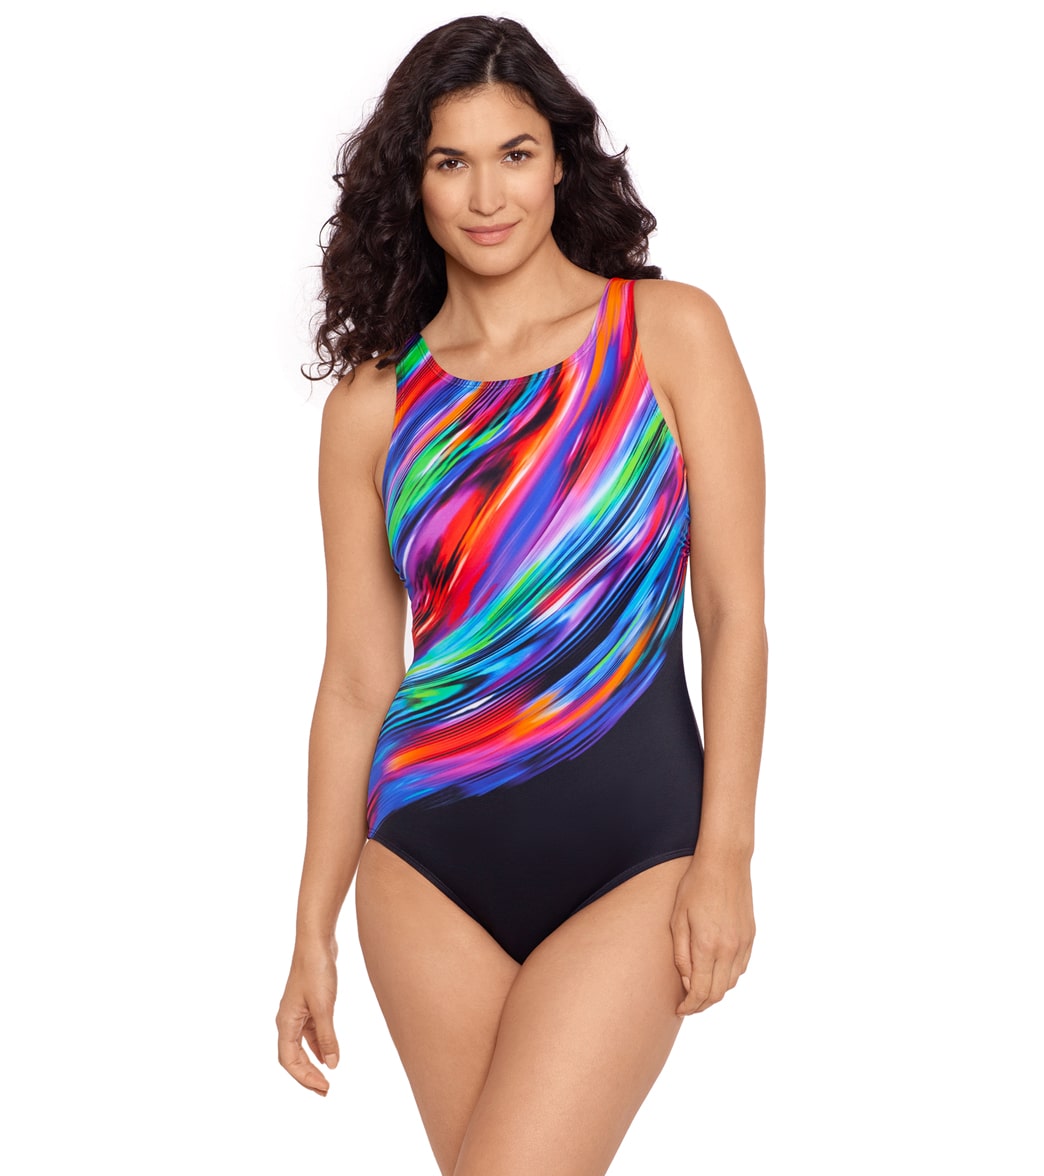 Reebok Women's Glowing Strong High Neck Chlorine Resistant One Piece Swimsuit - Multi 14 - Swimoutlet.com